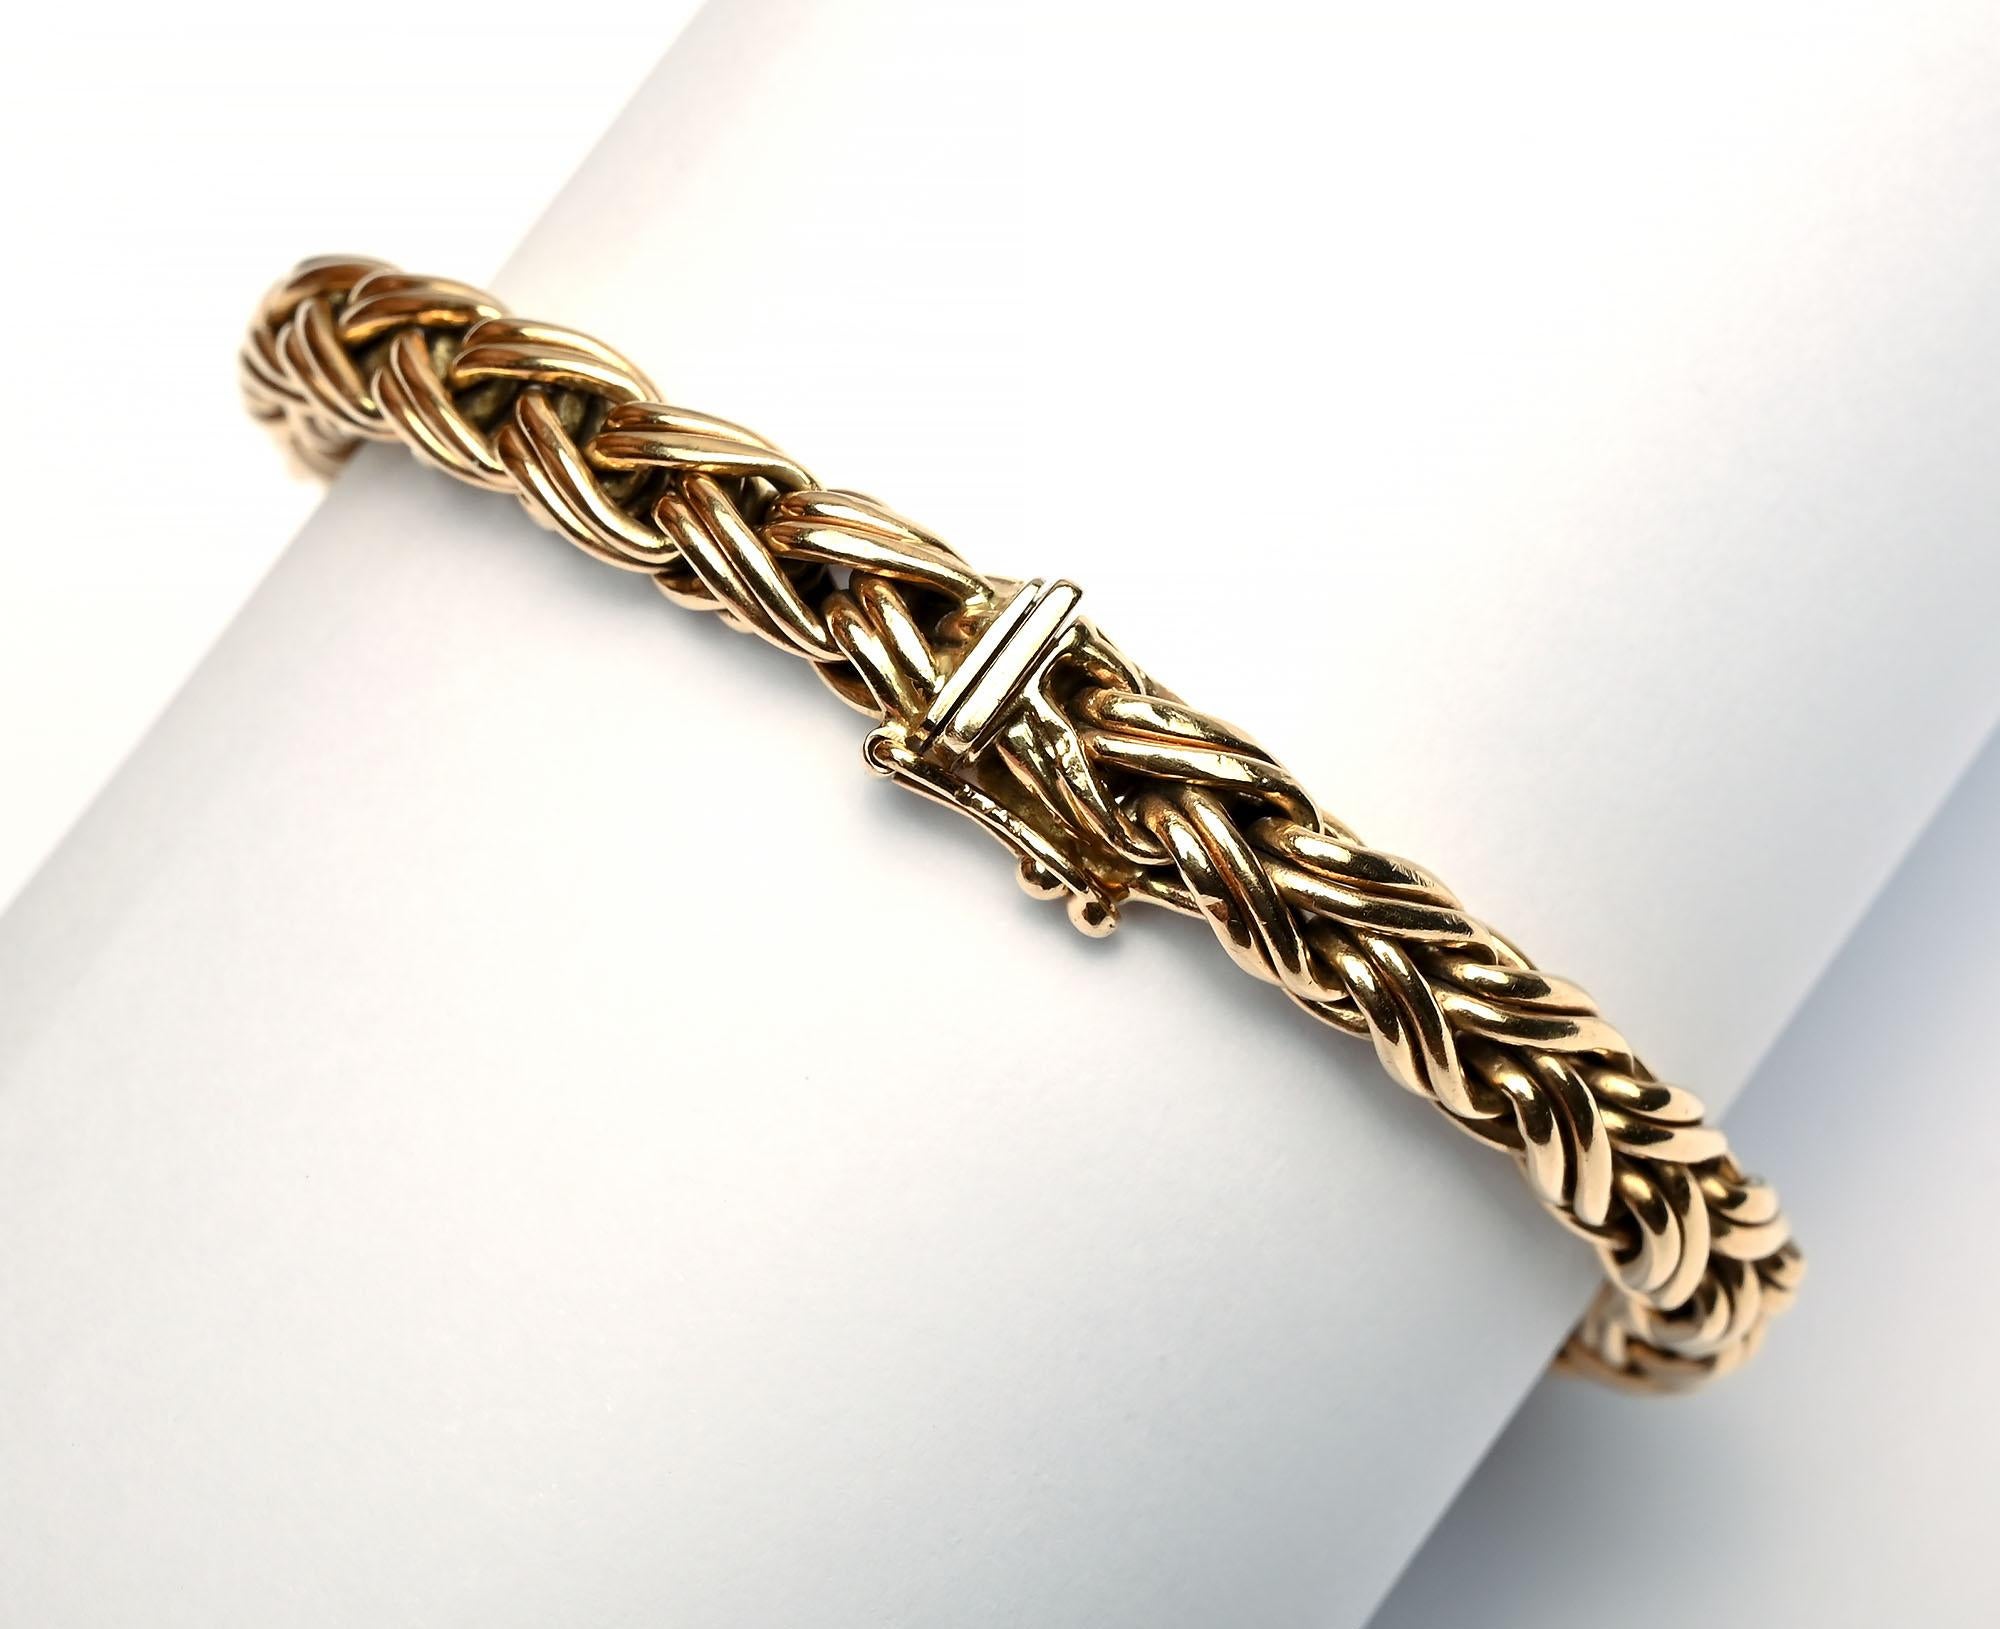 Classic herringbone chain bracelet by Tiffany that can be worn well by itself or as part of a group. The bracelet is 1/4 inch wide and a hair less than 7 1/2 inches long. It has a push clasp and safety, The bracelet is 14 karat gold. It comes in the